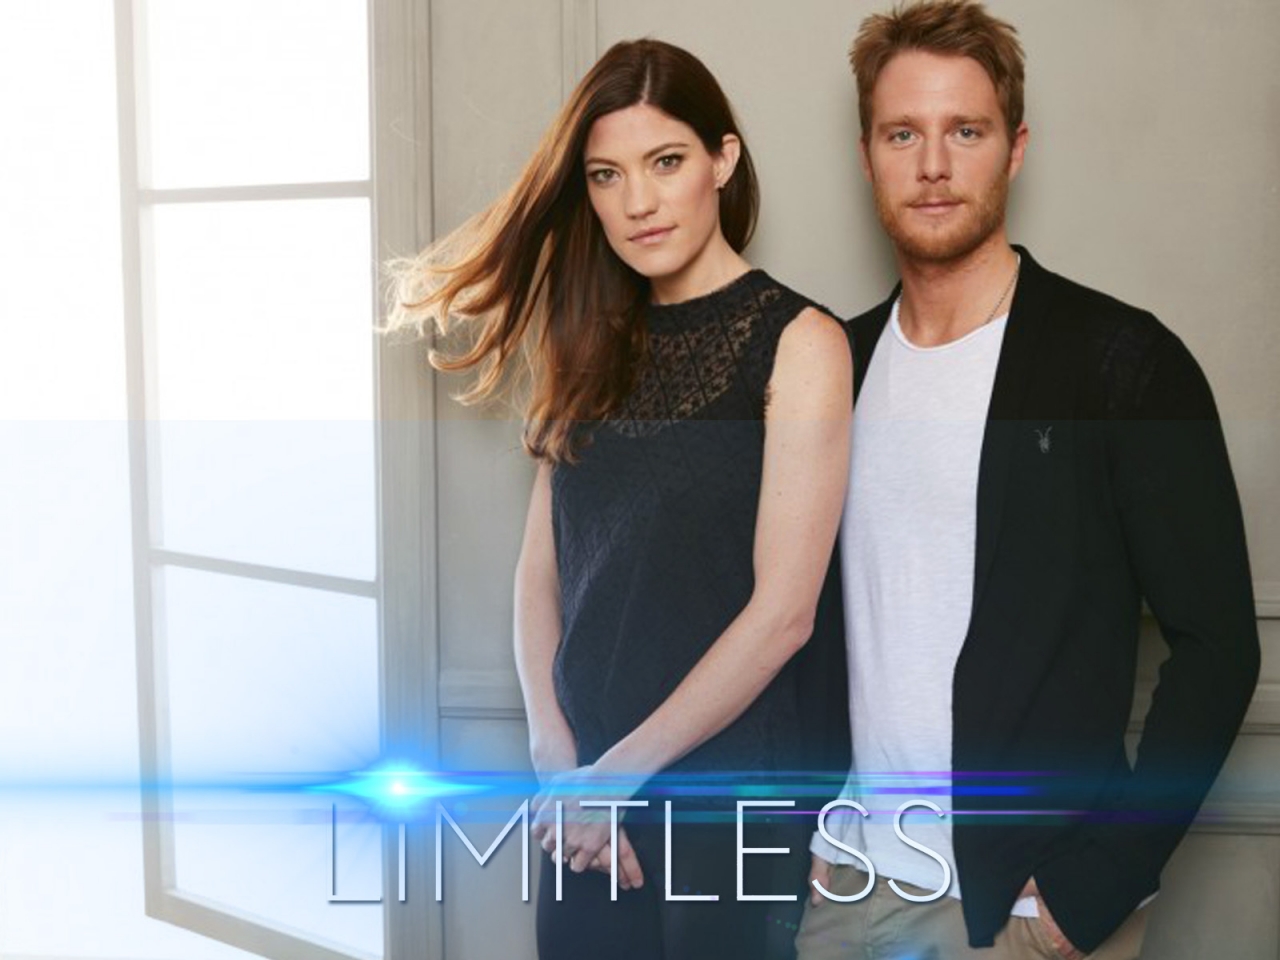 Limitless Cast for 1280 x 960 resolution